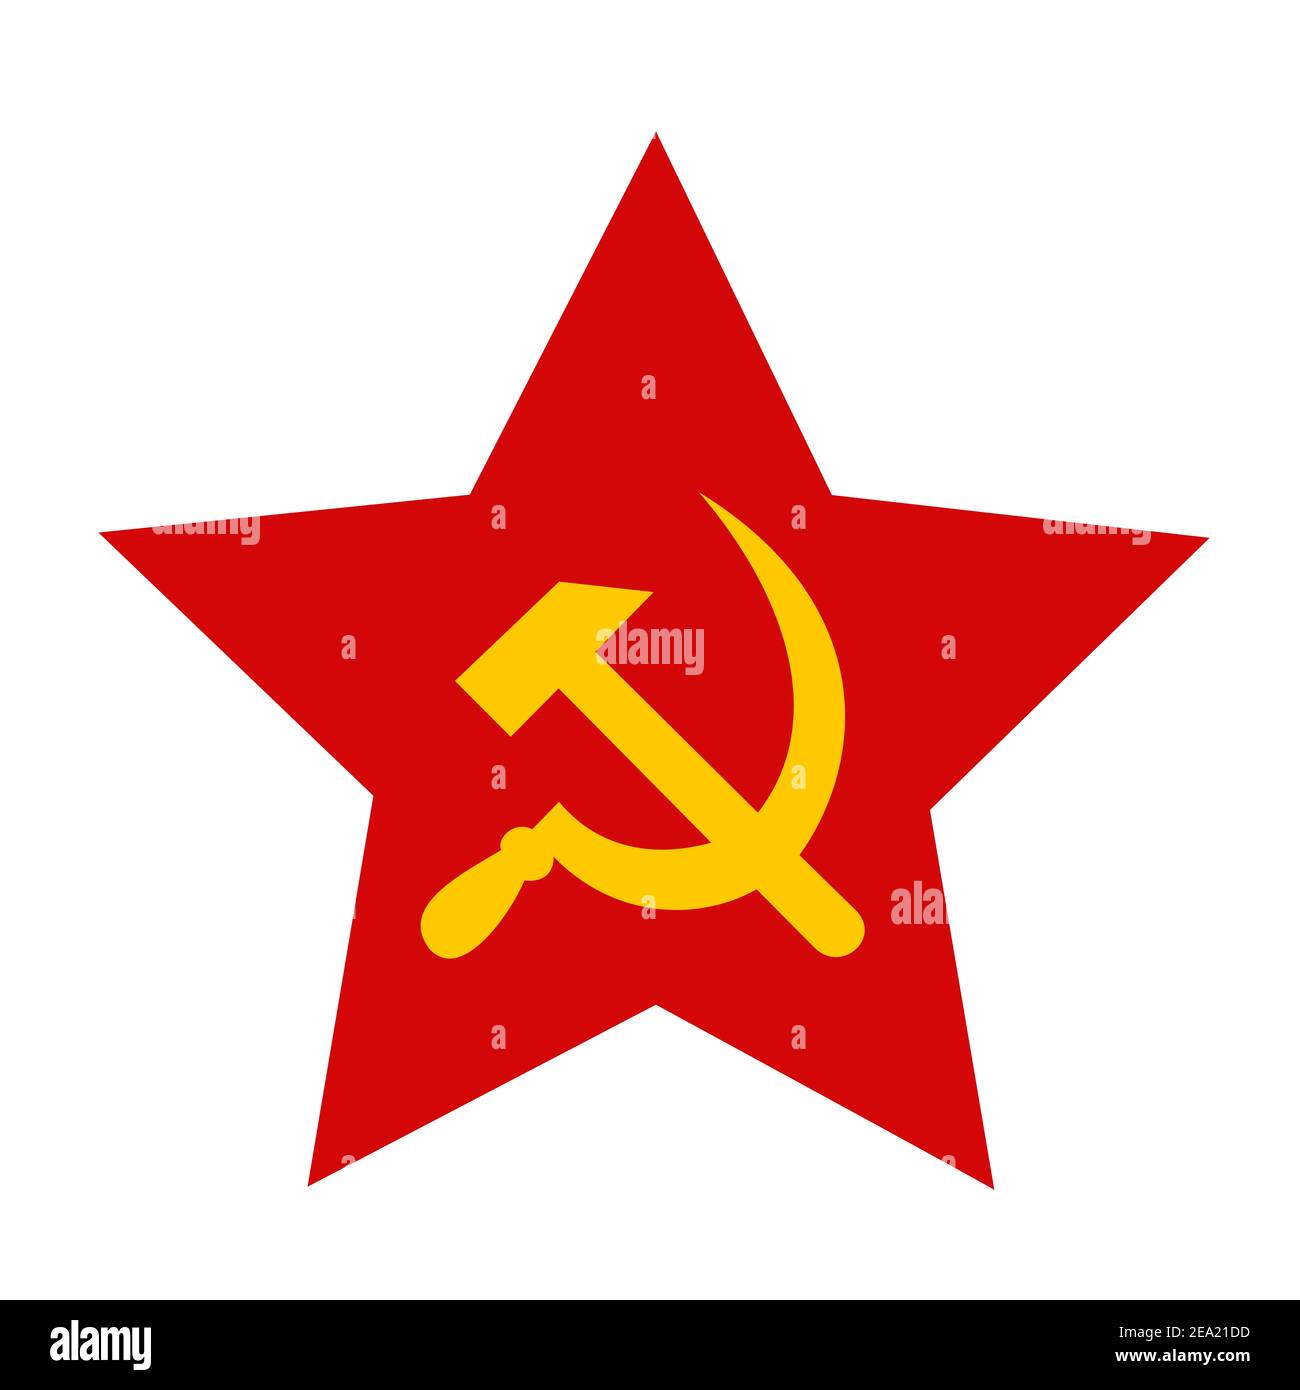 Red star with hammer and sickle - symbol and sign of communism and socialism. Vector illustration isolated on white. Stock Photo